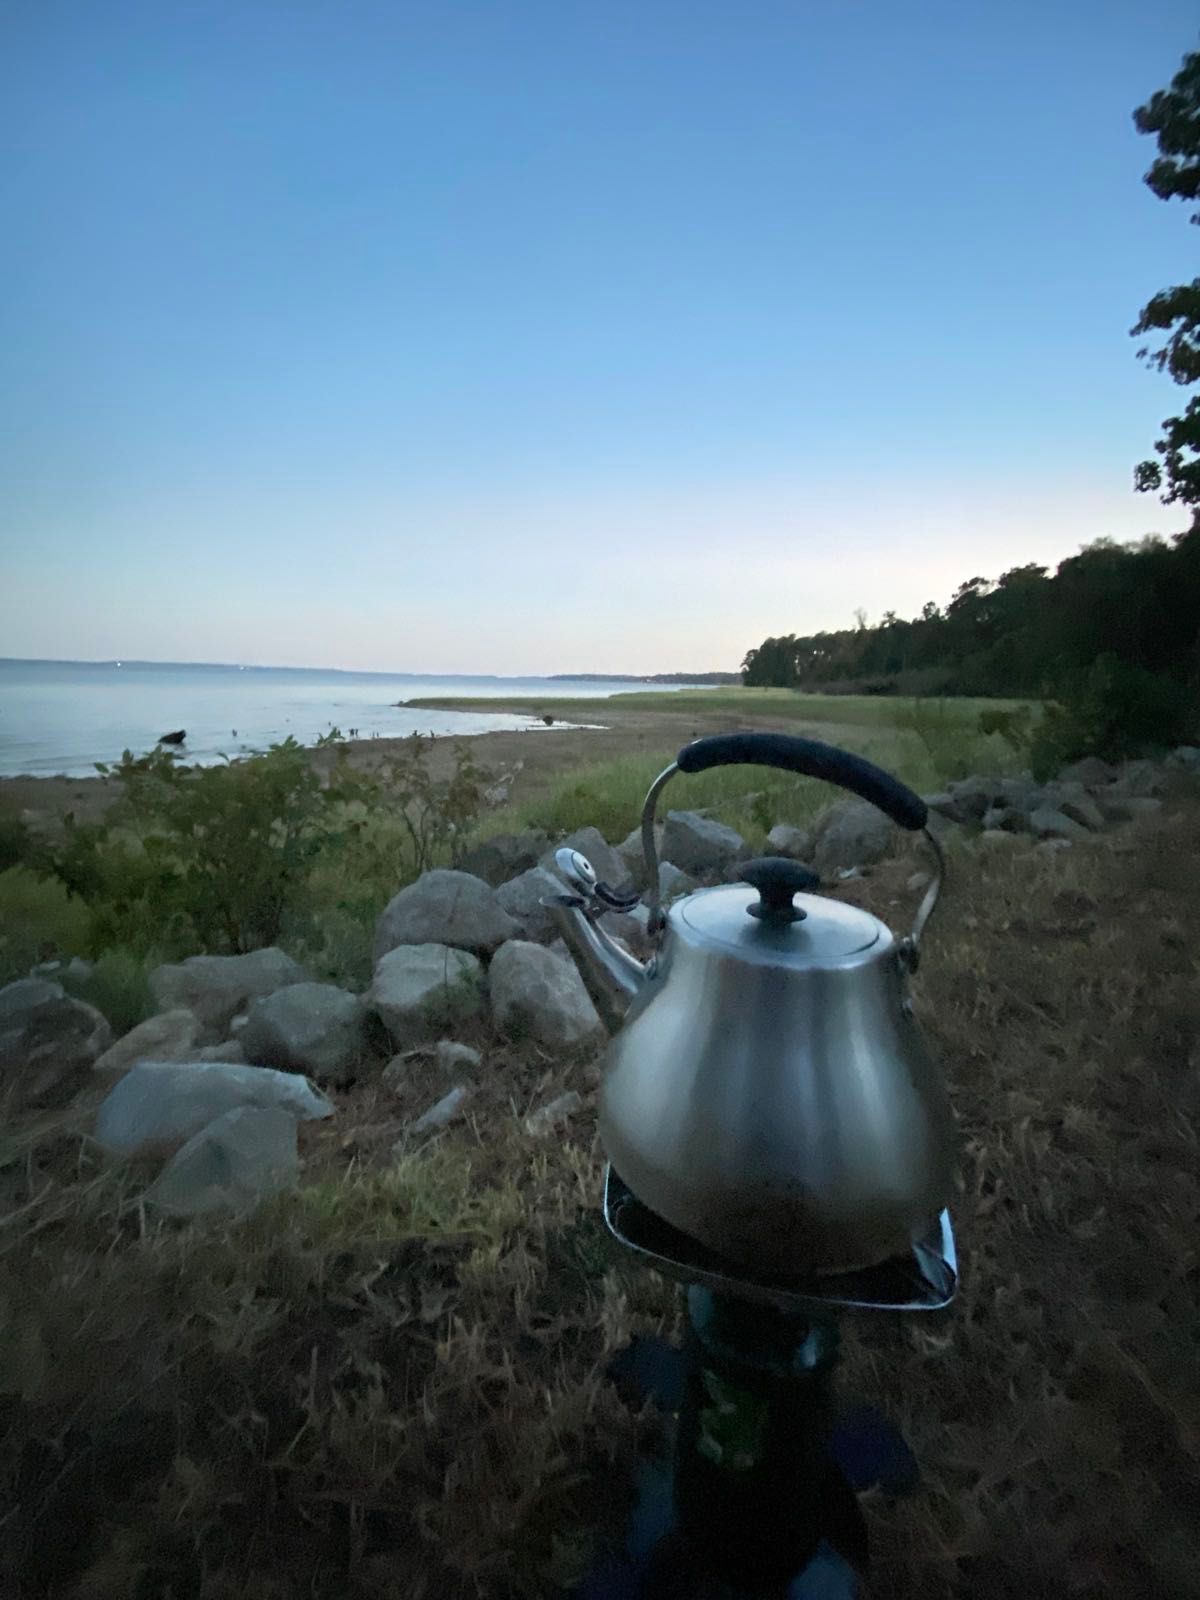 Camping time is also tea time to wind down from a long day on the road.